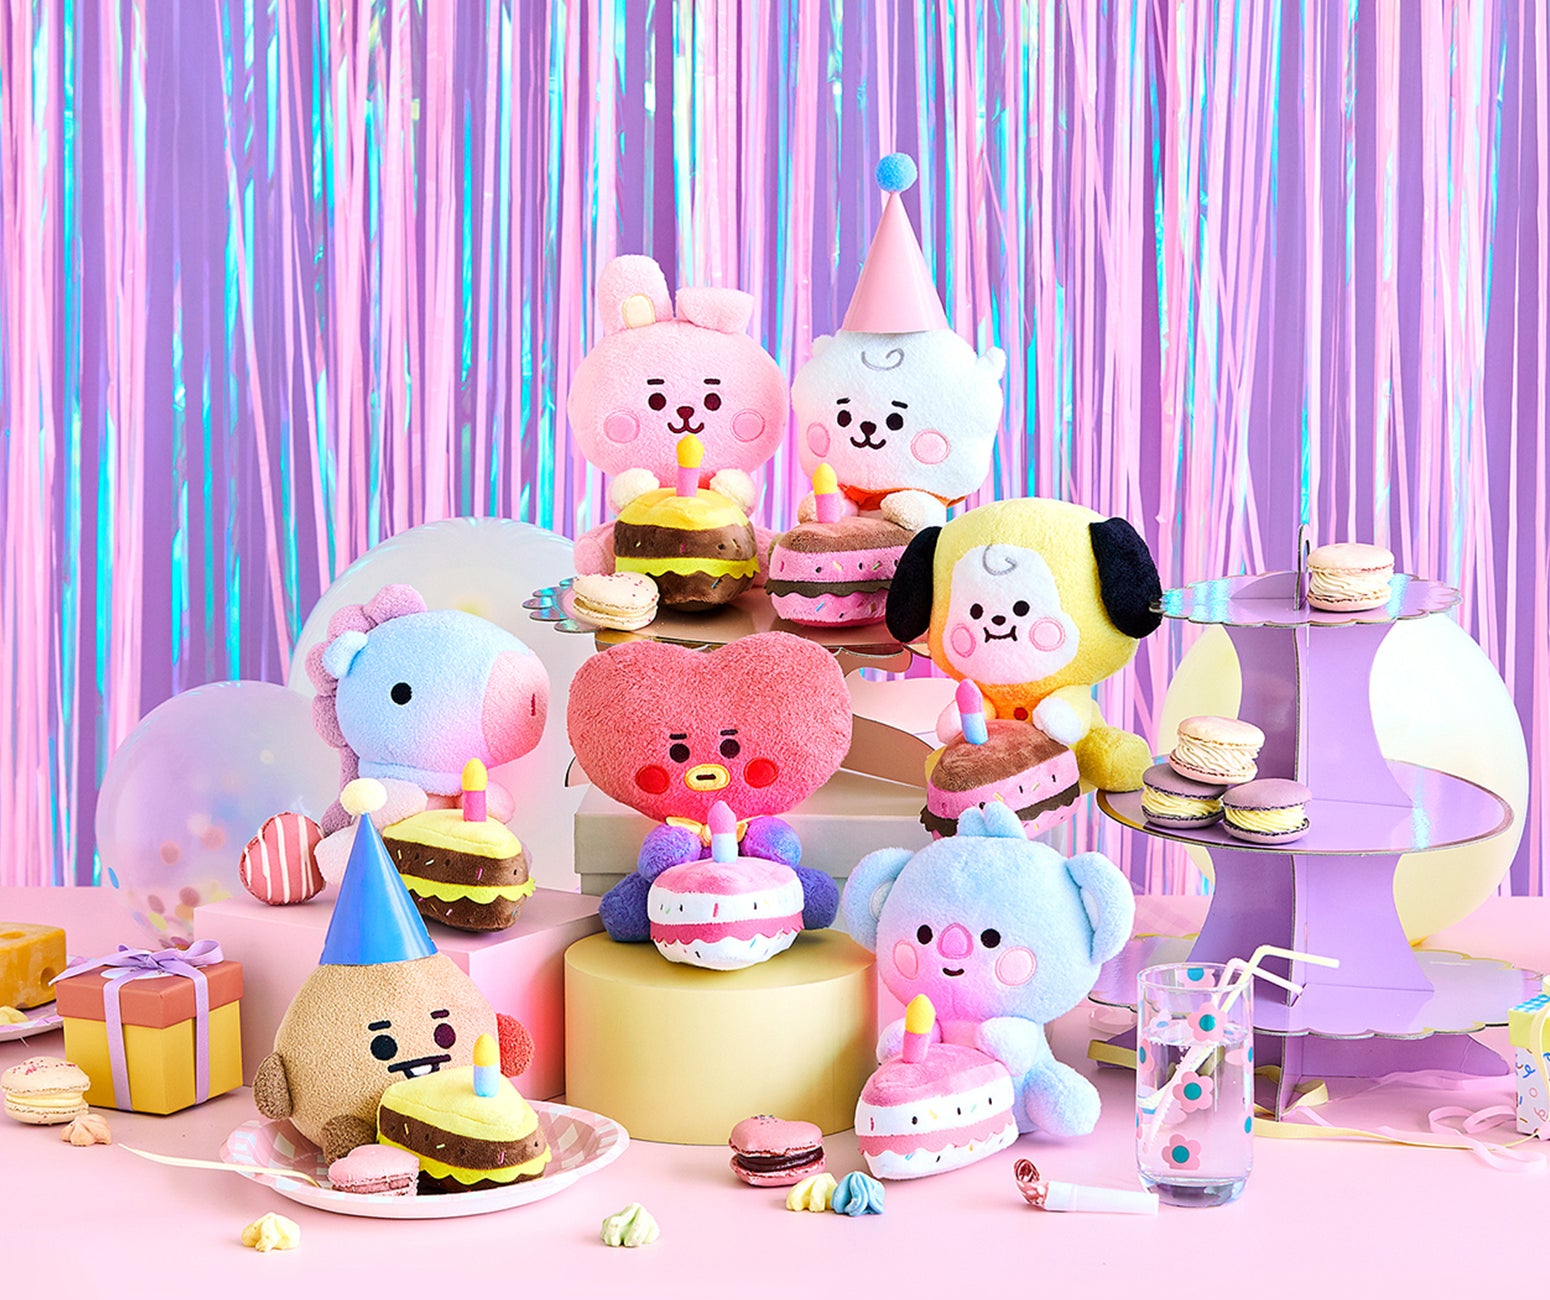 BT21 Cooky Cake! | BTS Cake Collab - YouTube